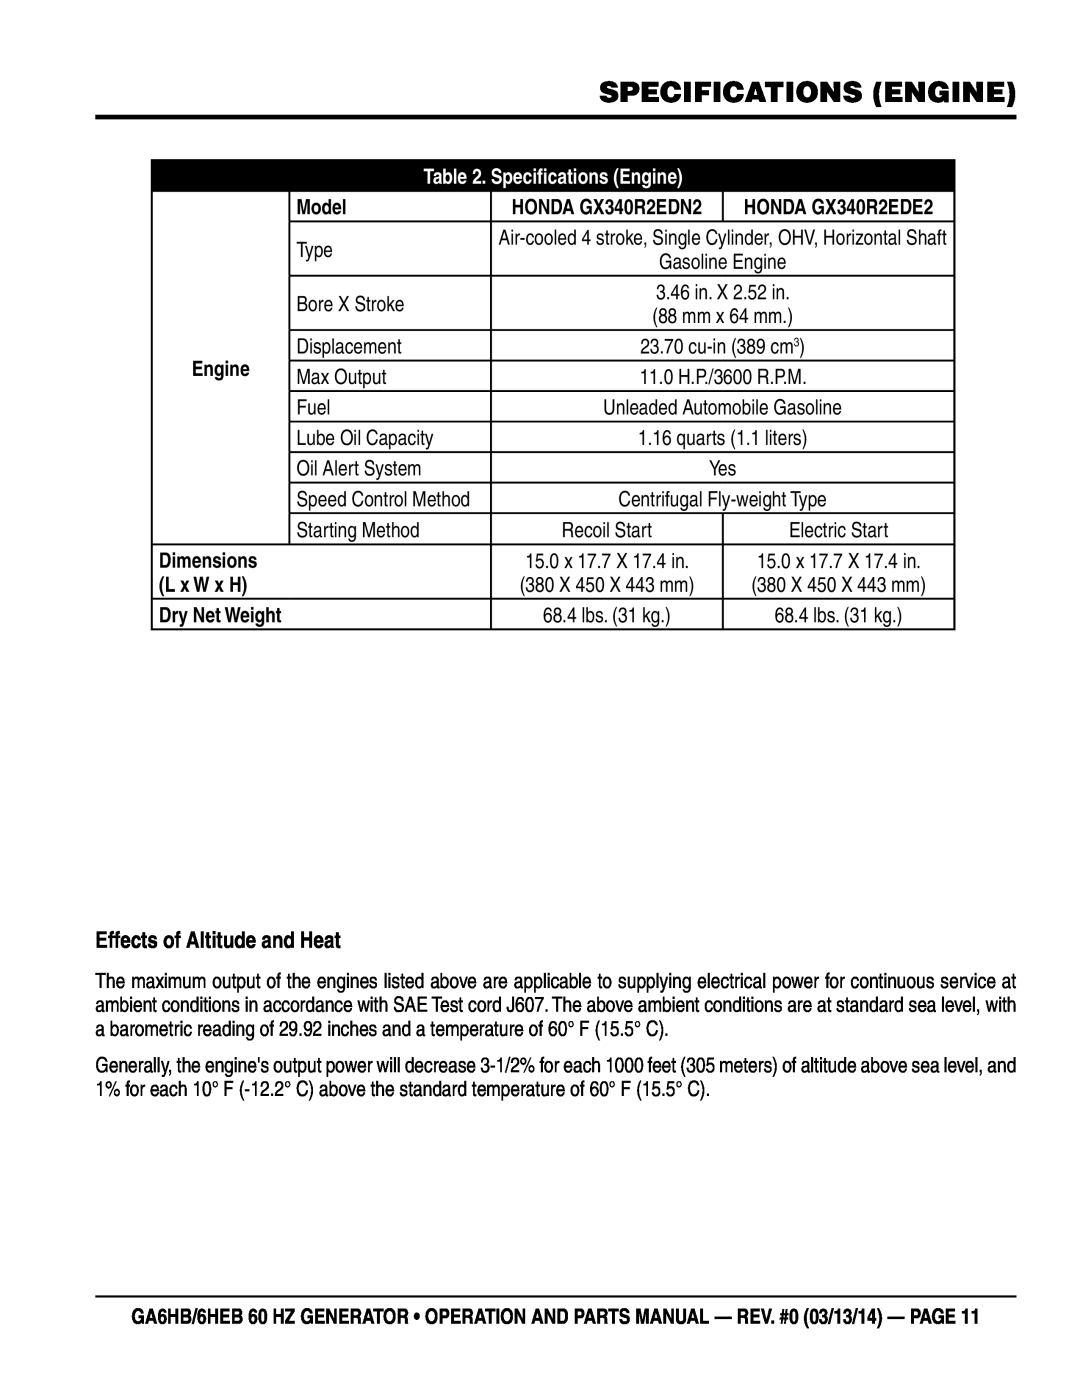 Multiquip ga6HB SPECIFICATIONS engine, Effects of Altitude and Heat, Specifications Engine, Model, Dimensions, L x W x H 